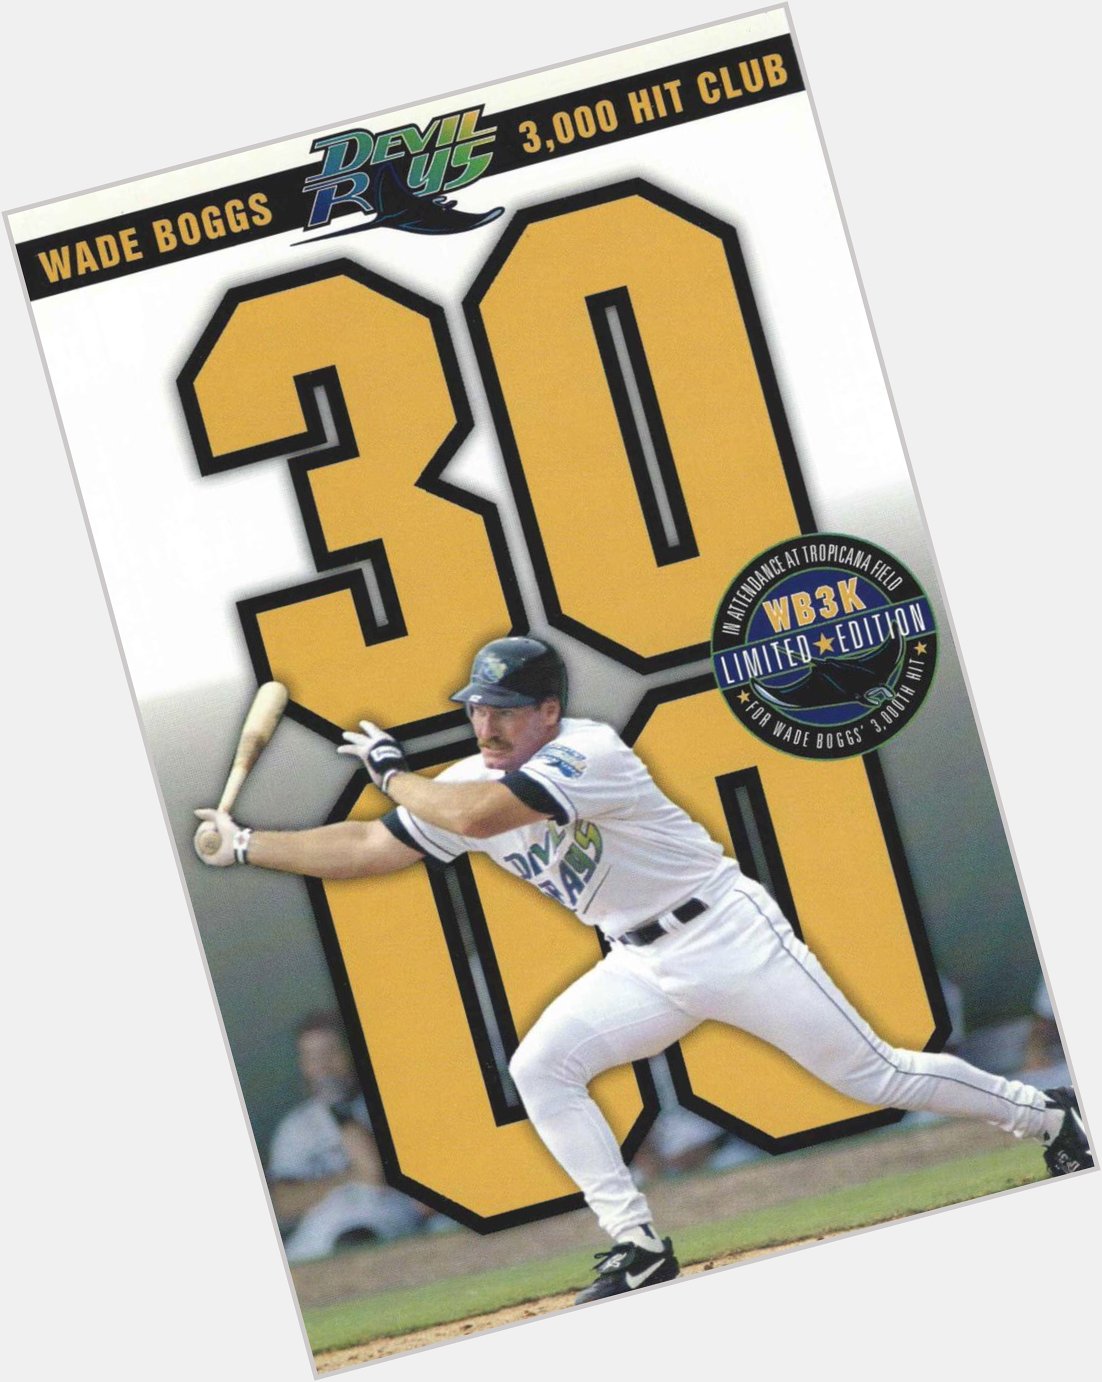  to being at The Trop the day Wade Boggs got his 3,000th hit. Happy Birthday 